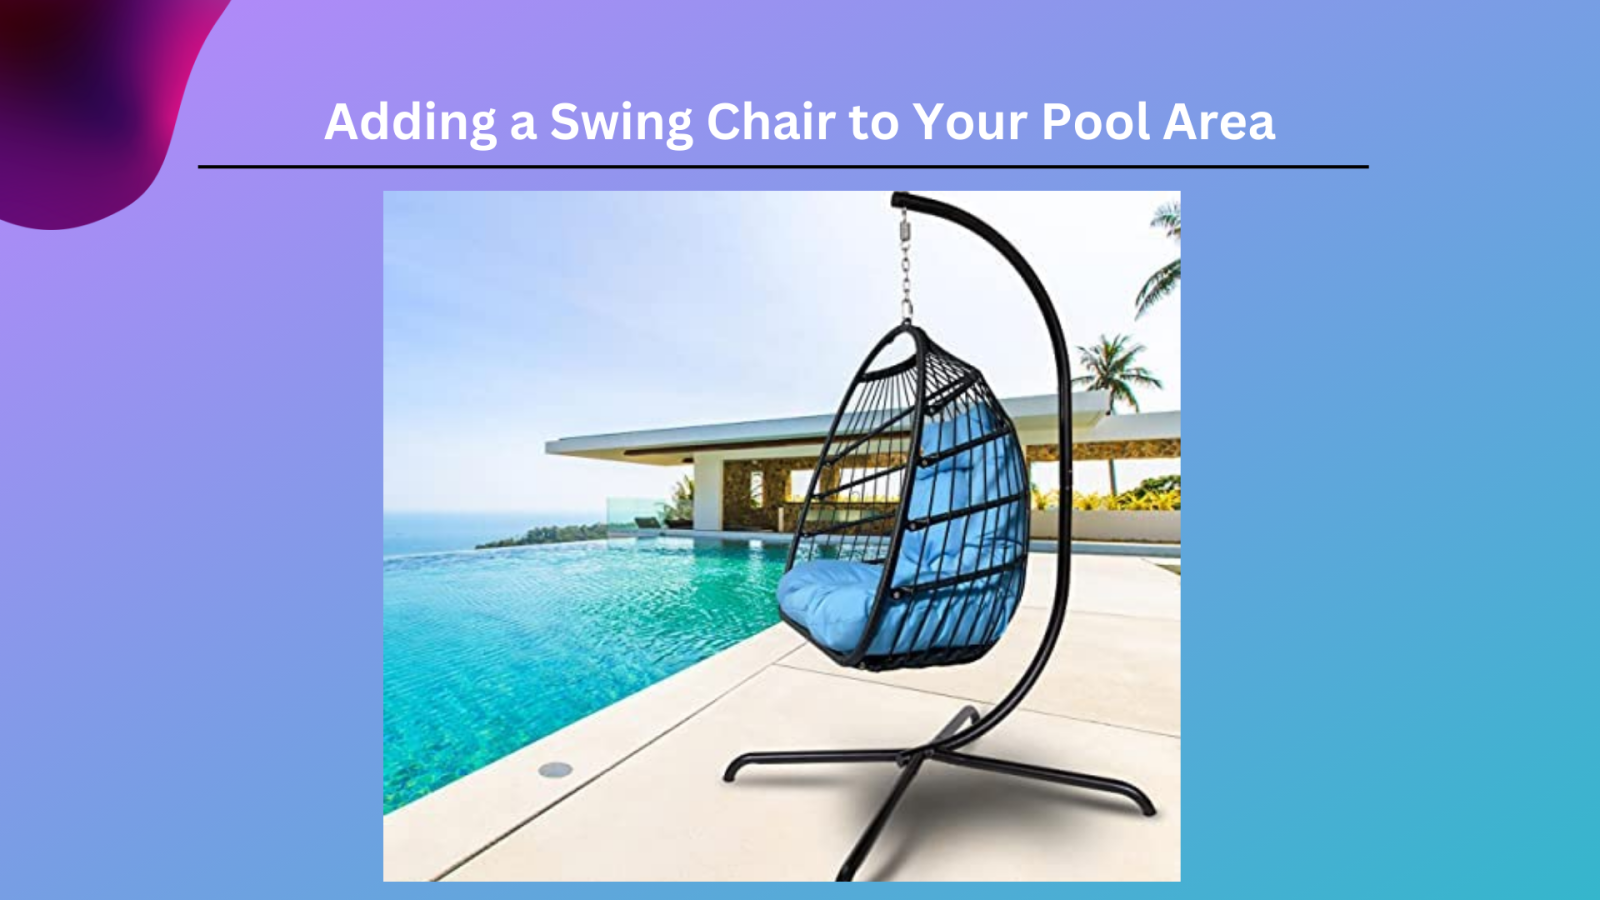 Adding a Swing Chair to Your Pool Area